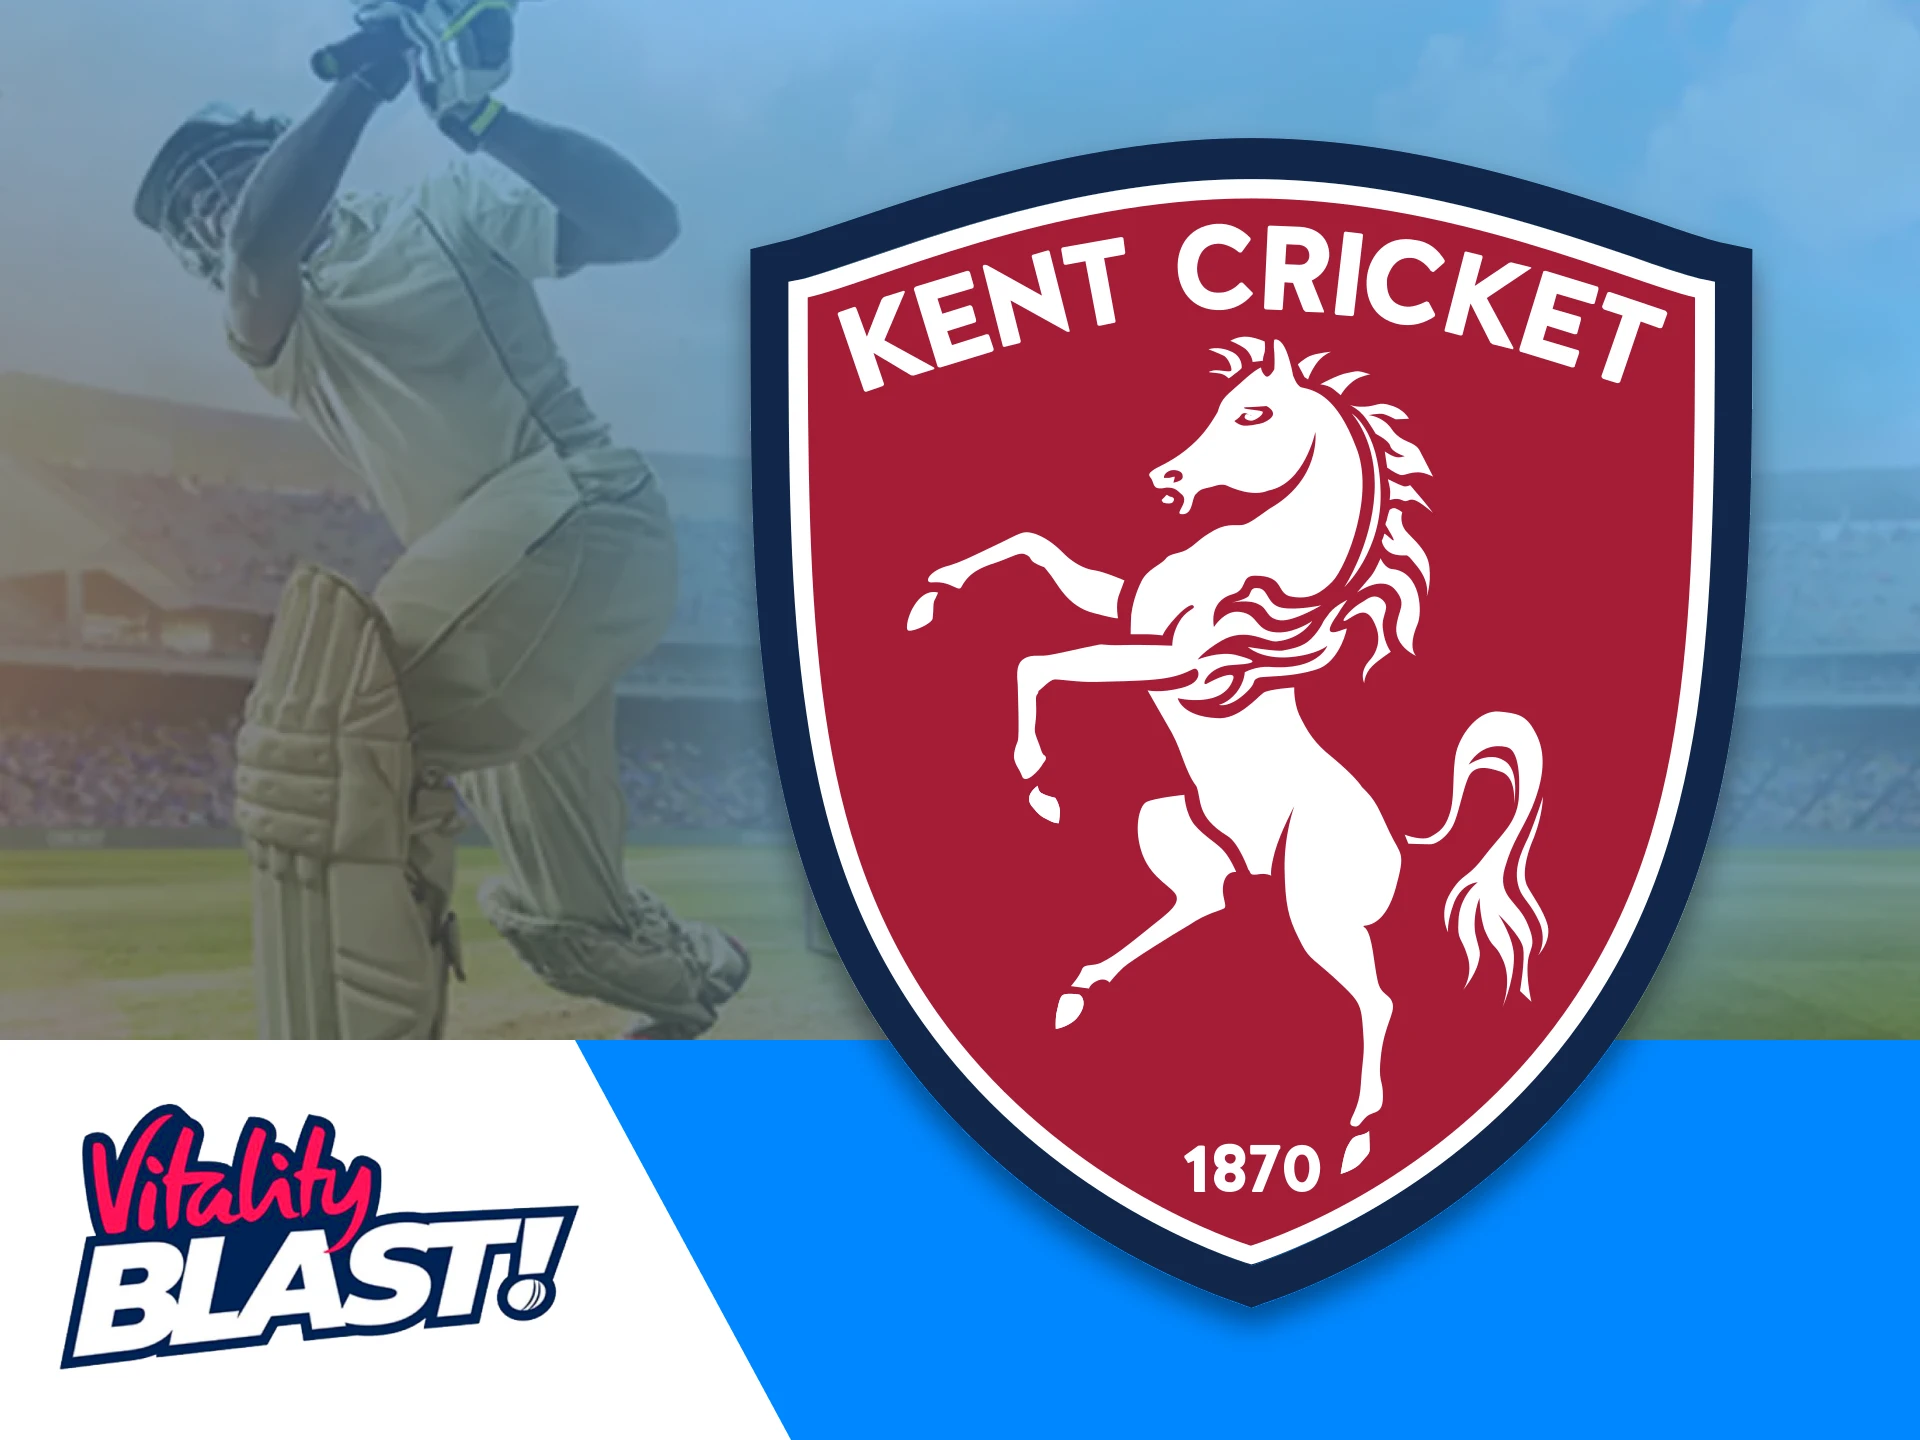 The Kent Spitfires have been playing premier cricket since the 18th century.